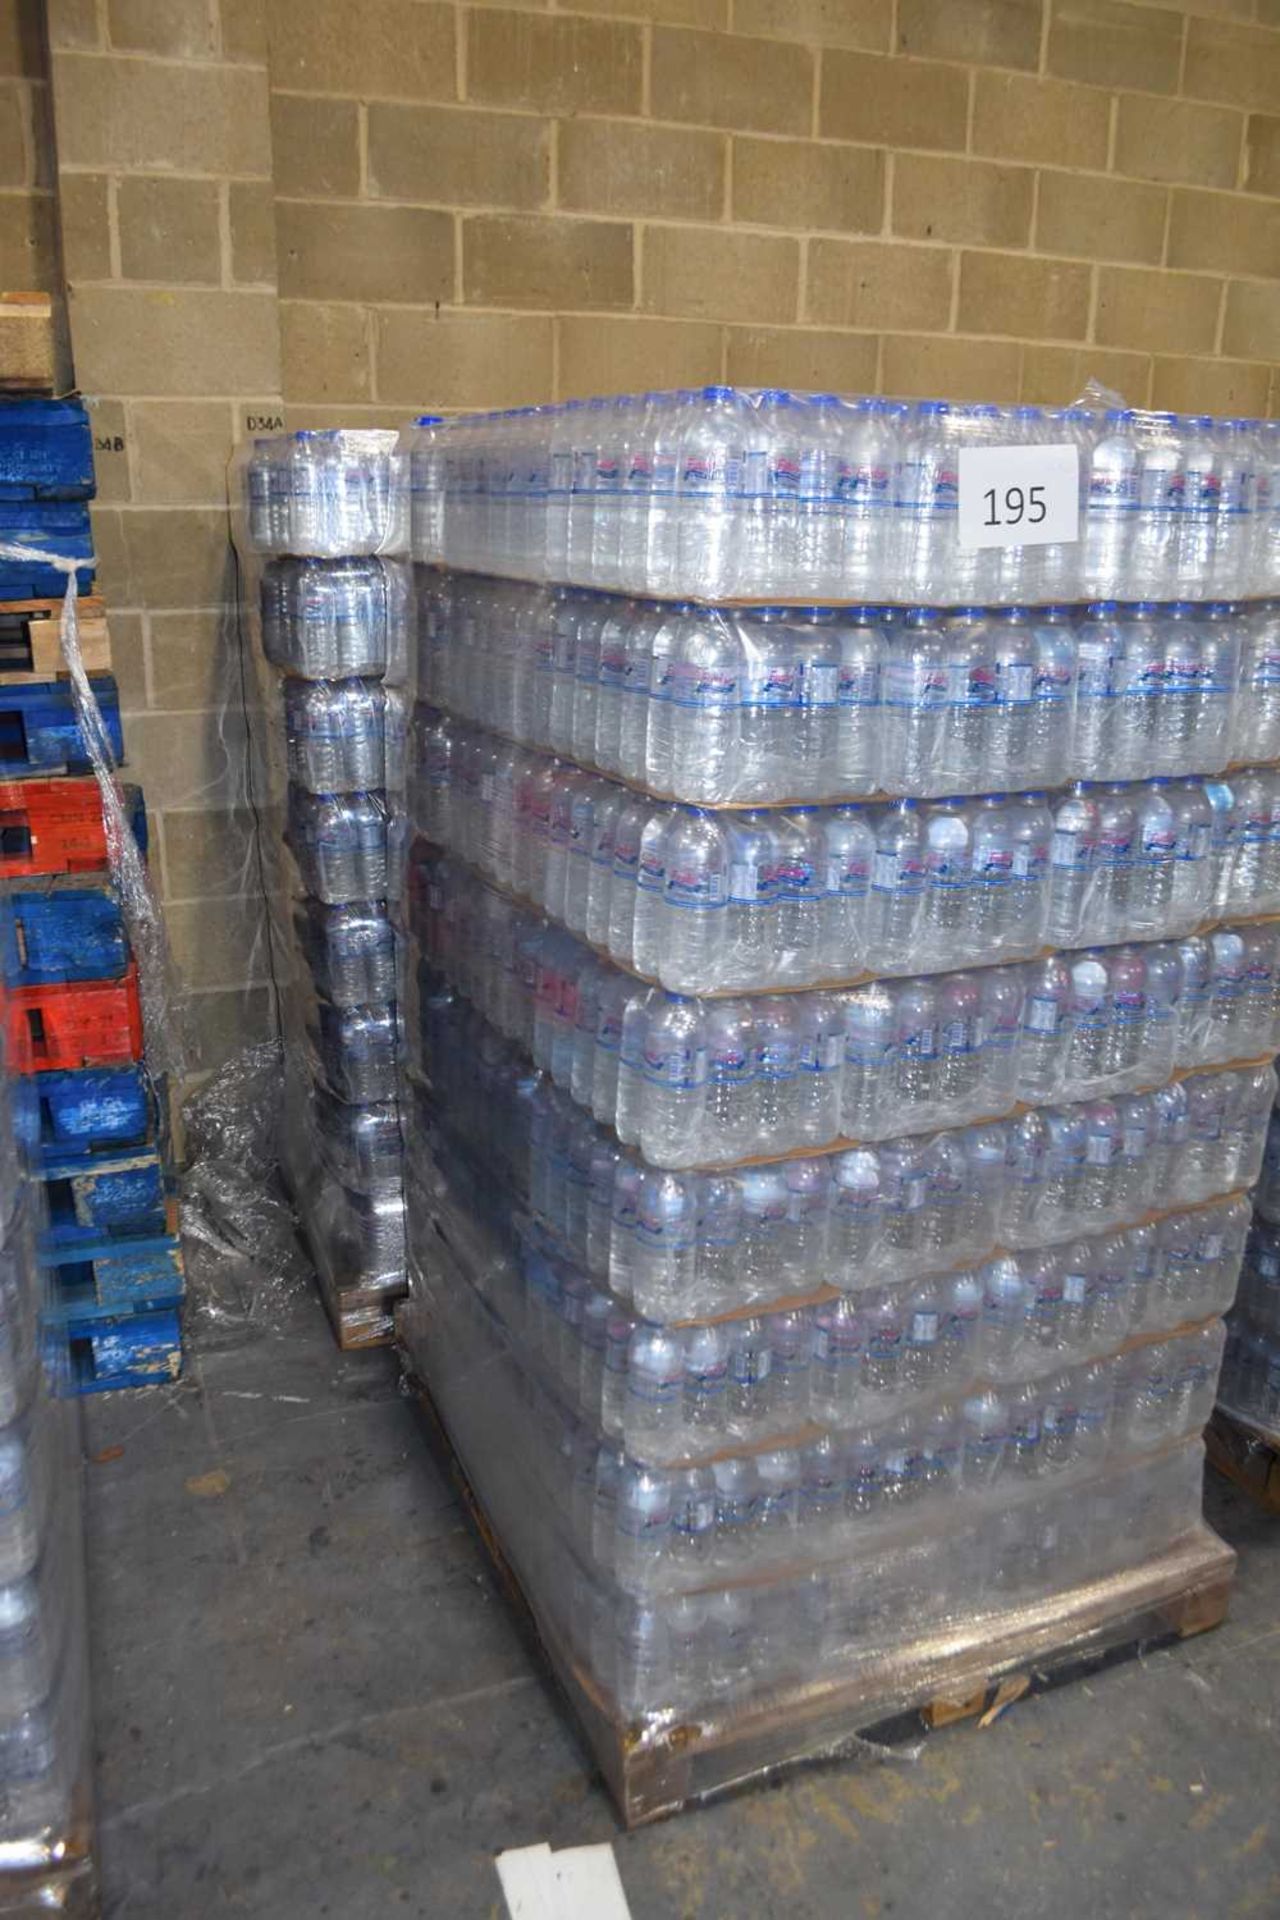 Two pallets of bottled water, each pallet containing 2300 500ml bottles with an expiry date of 26.